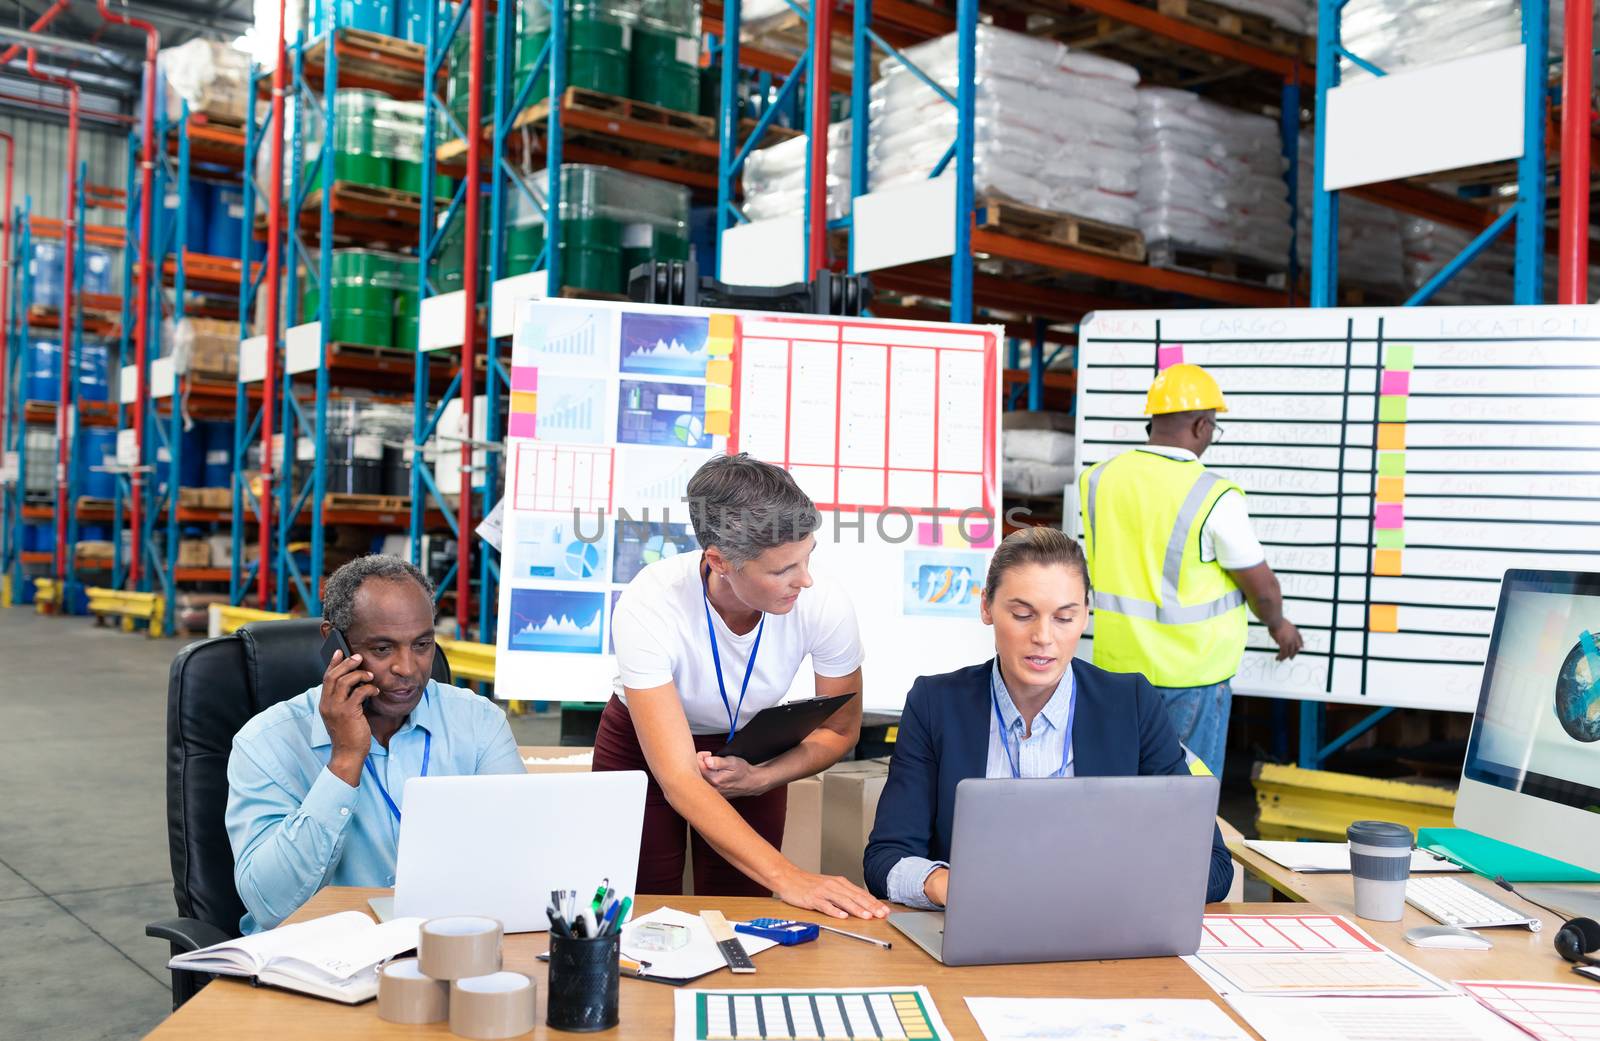 Front view of mature Caucasian female manager with her coworker discussing over laptop at desk in warehouse. This is a freight transportation and distribution warehouse. Industrial and industrial workers concept